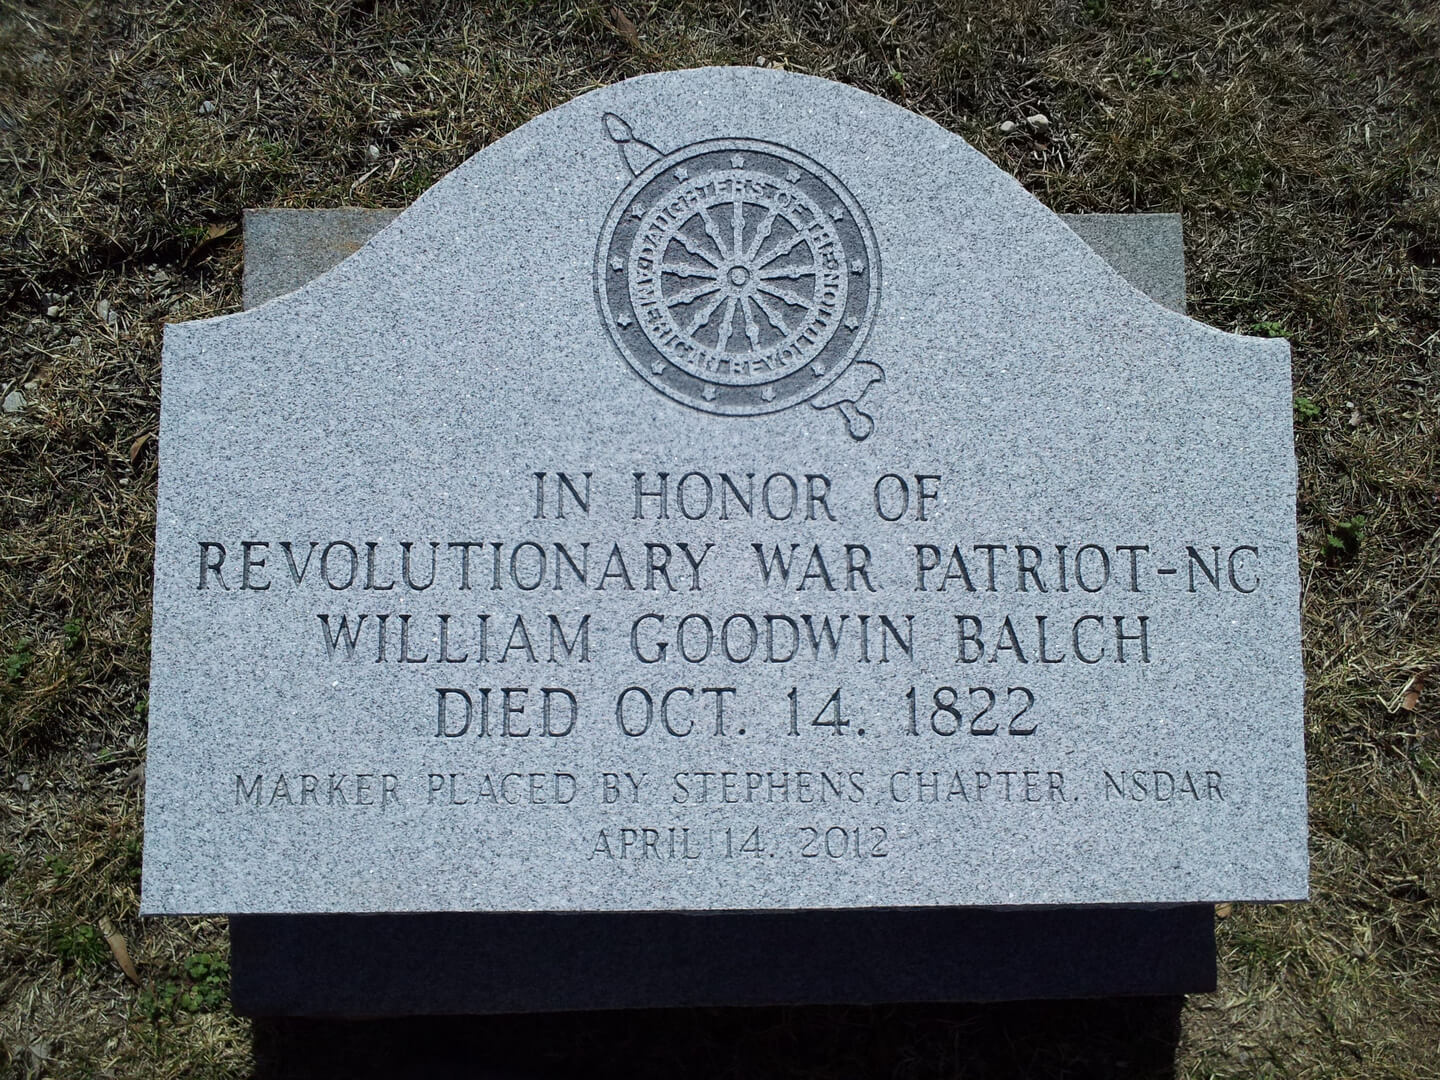 A memorial slab with the name William Goodwin Balch